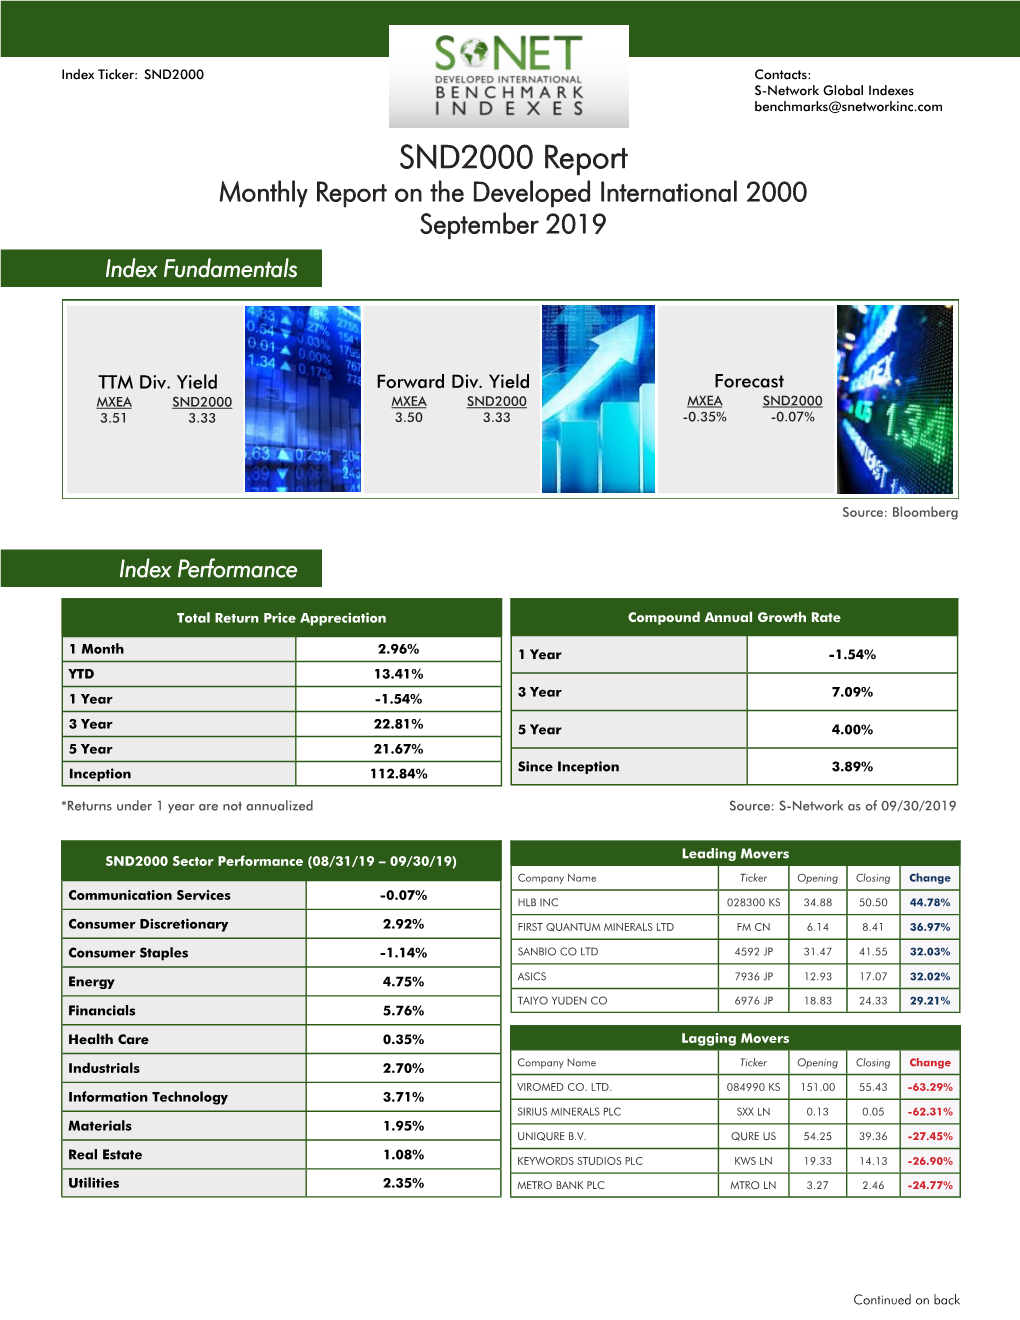 SND2000 Report Monthly Report on the Developed International 2000 September 2019 Index Fundamentals